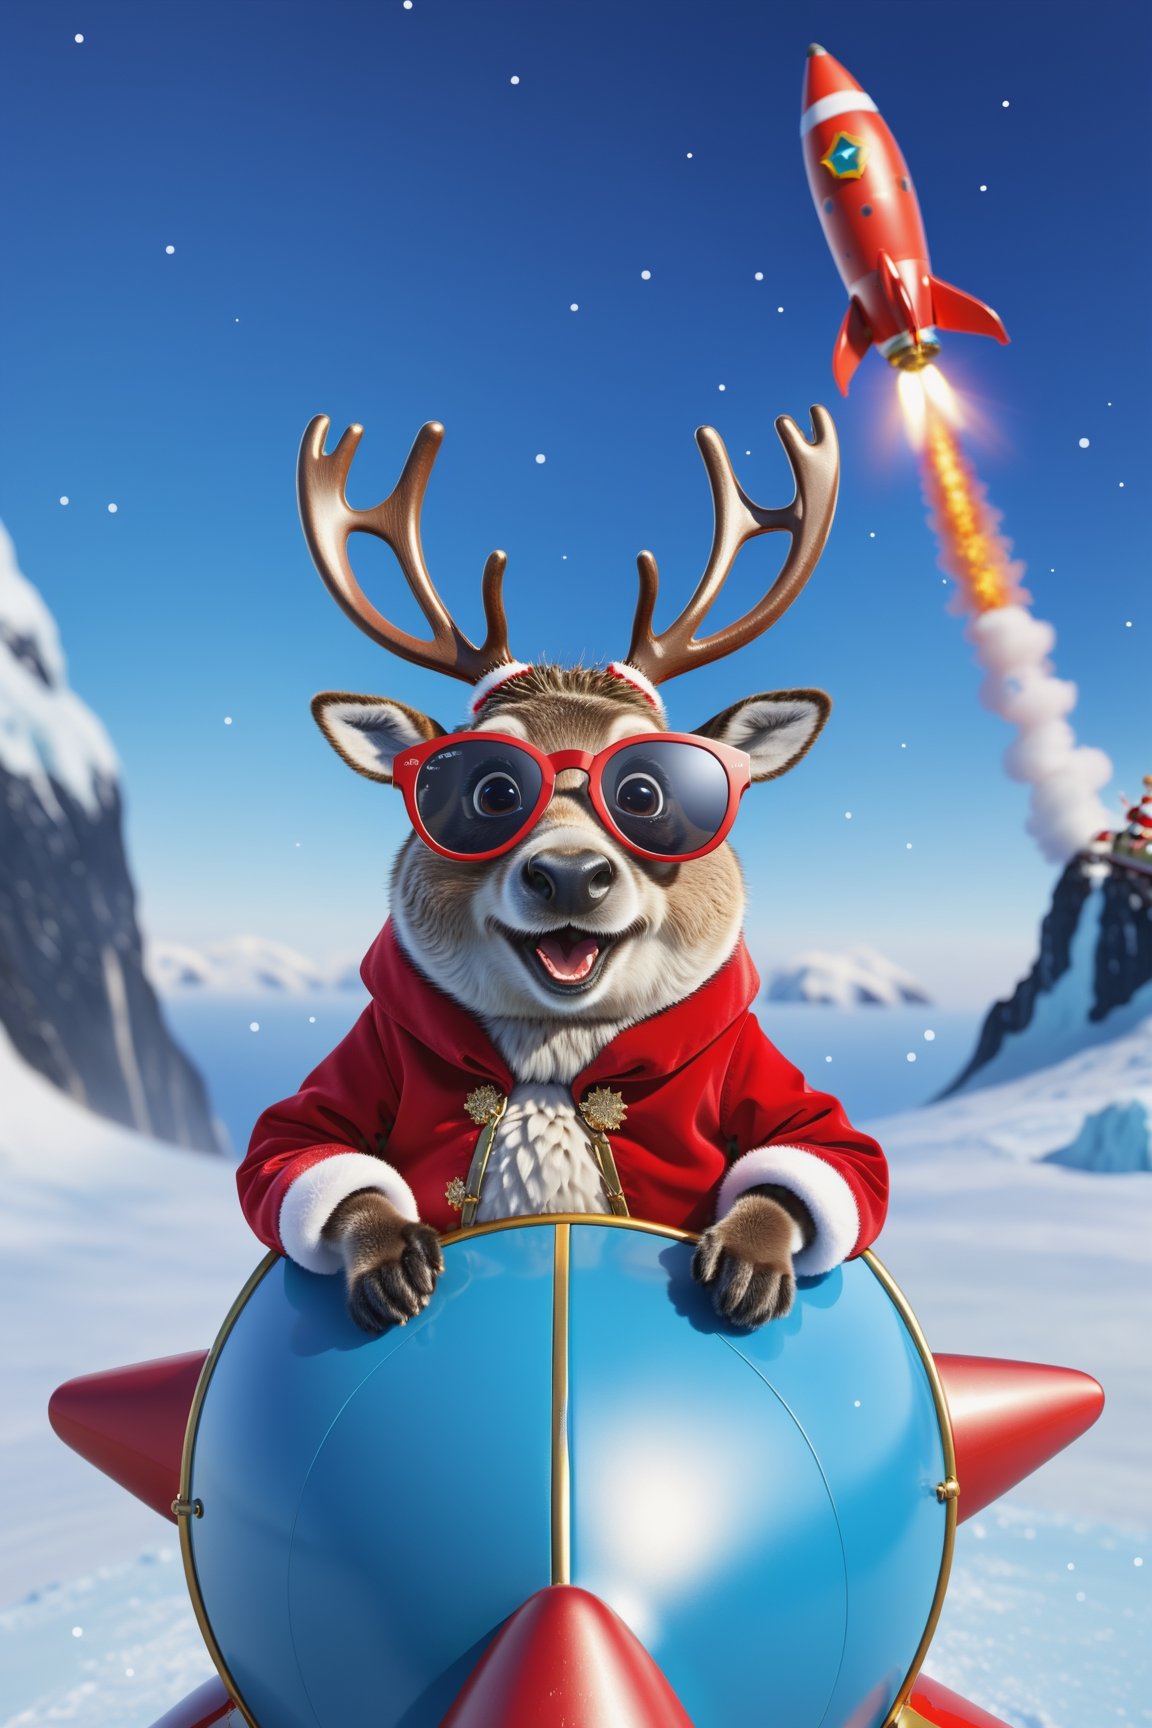 Reindeer weatring sunglasses sitting on a flying rocket, wearing santa claus clothes, snowing, screaming, penguin in background